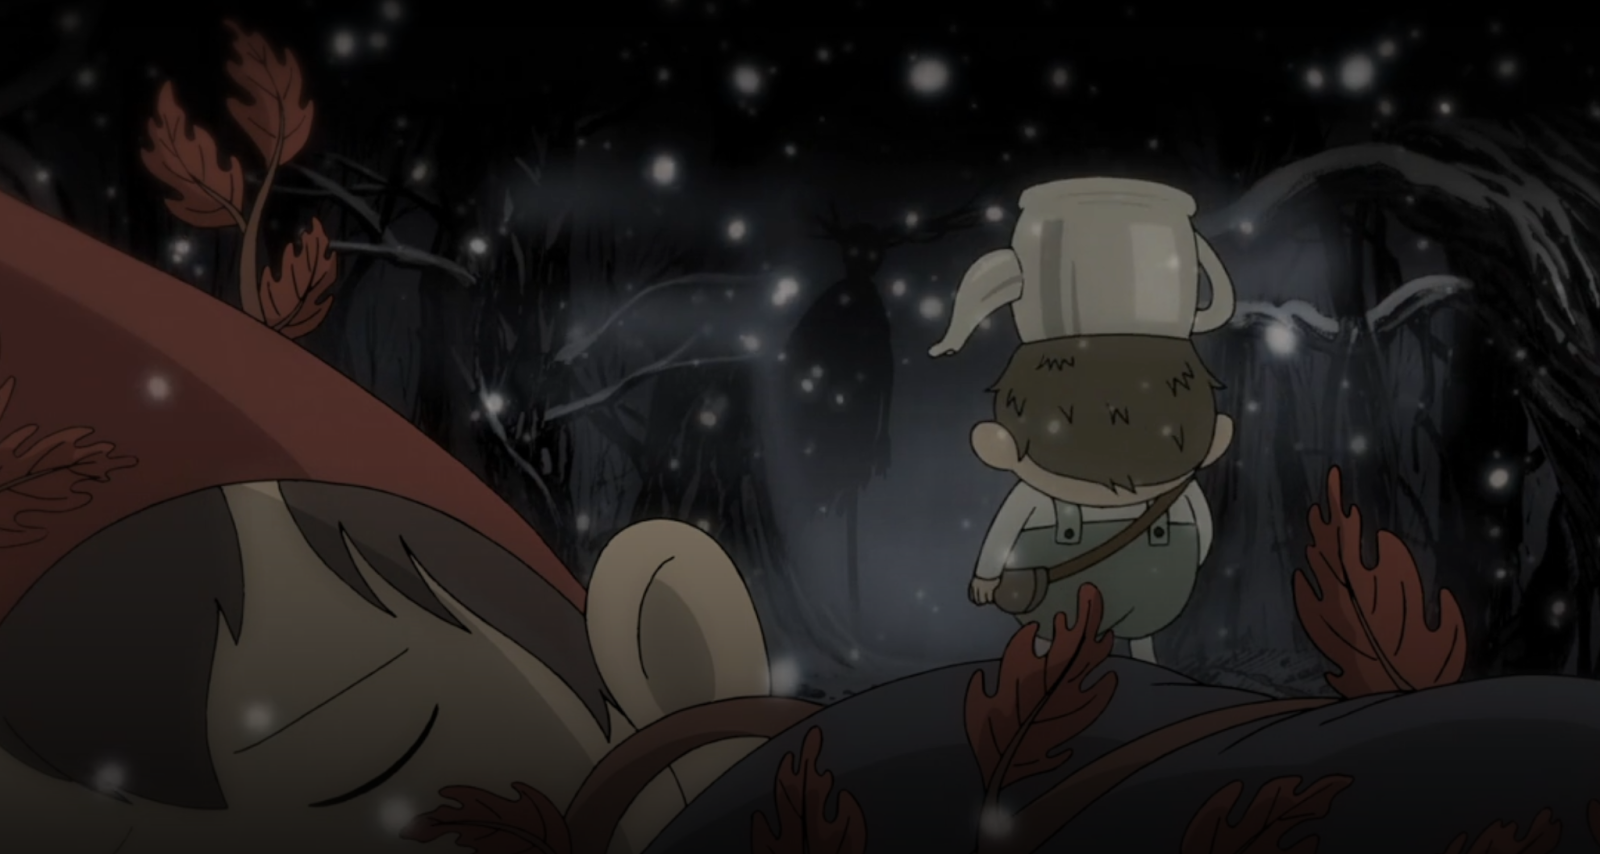 A screen still from Over the Garden Wall, featuring Wirt walking away from Greg, who is laying on the ground with his eyes closed, towards The Beast.